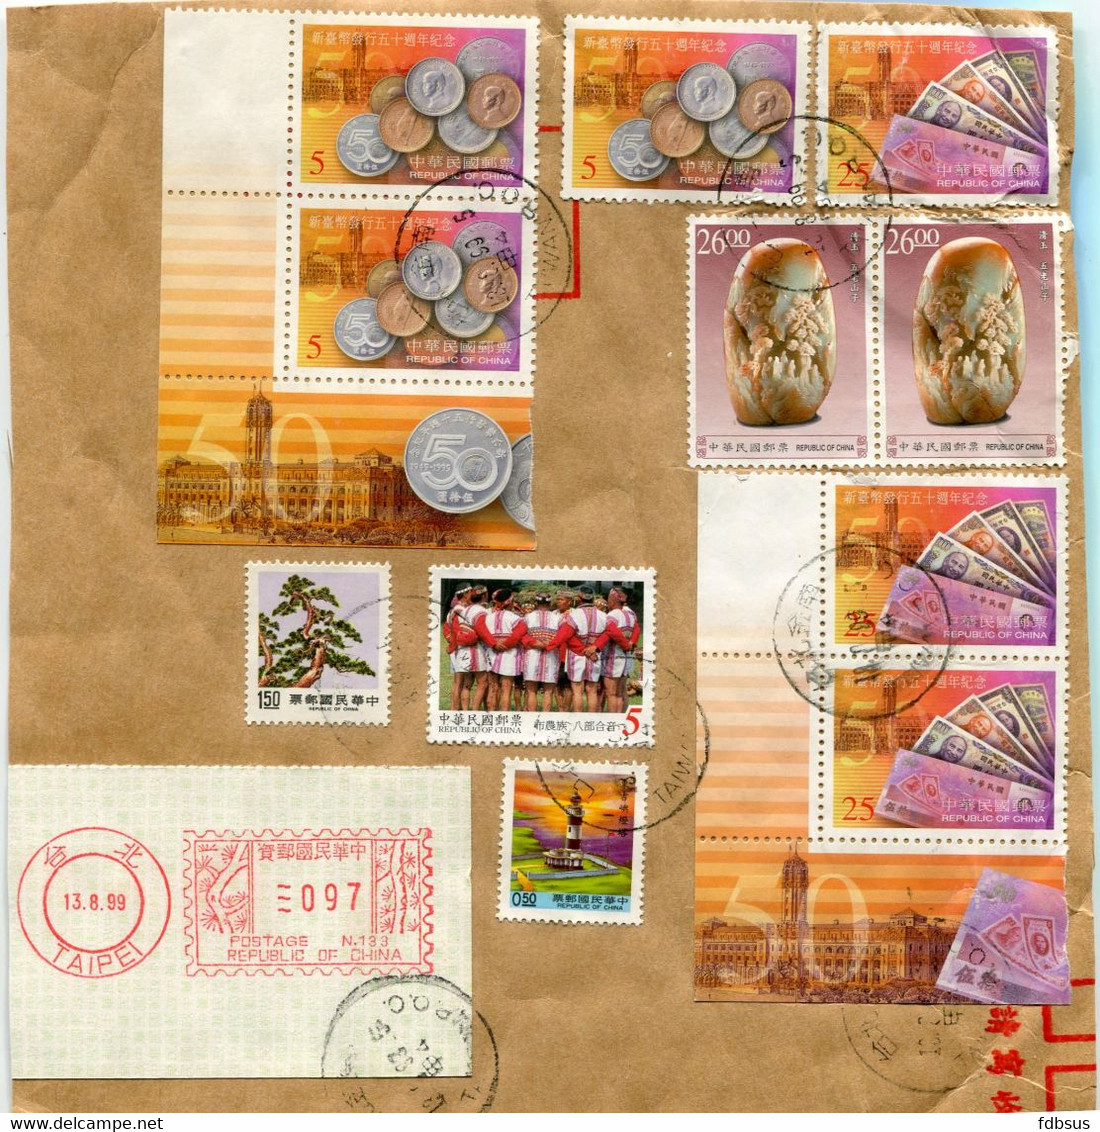 1999 FRONT OF ENVELOPE WITH SEVERAL STAMPS REGISTERED - SEE SCAN - STAMPS AND STICKER - Covers & Documents